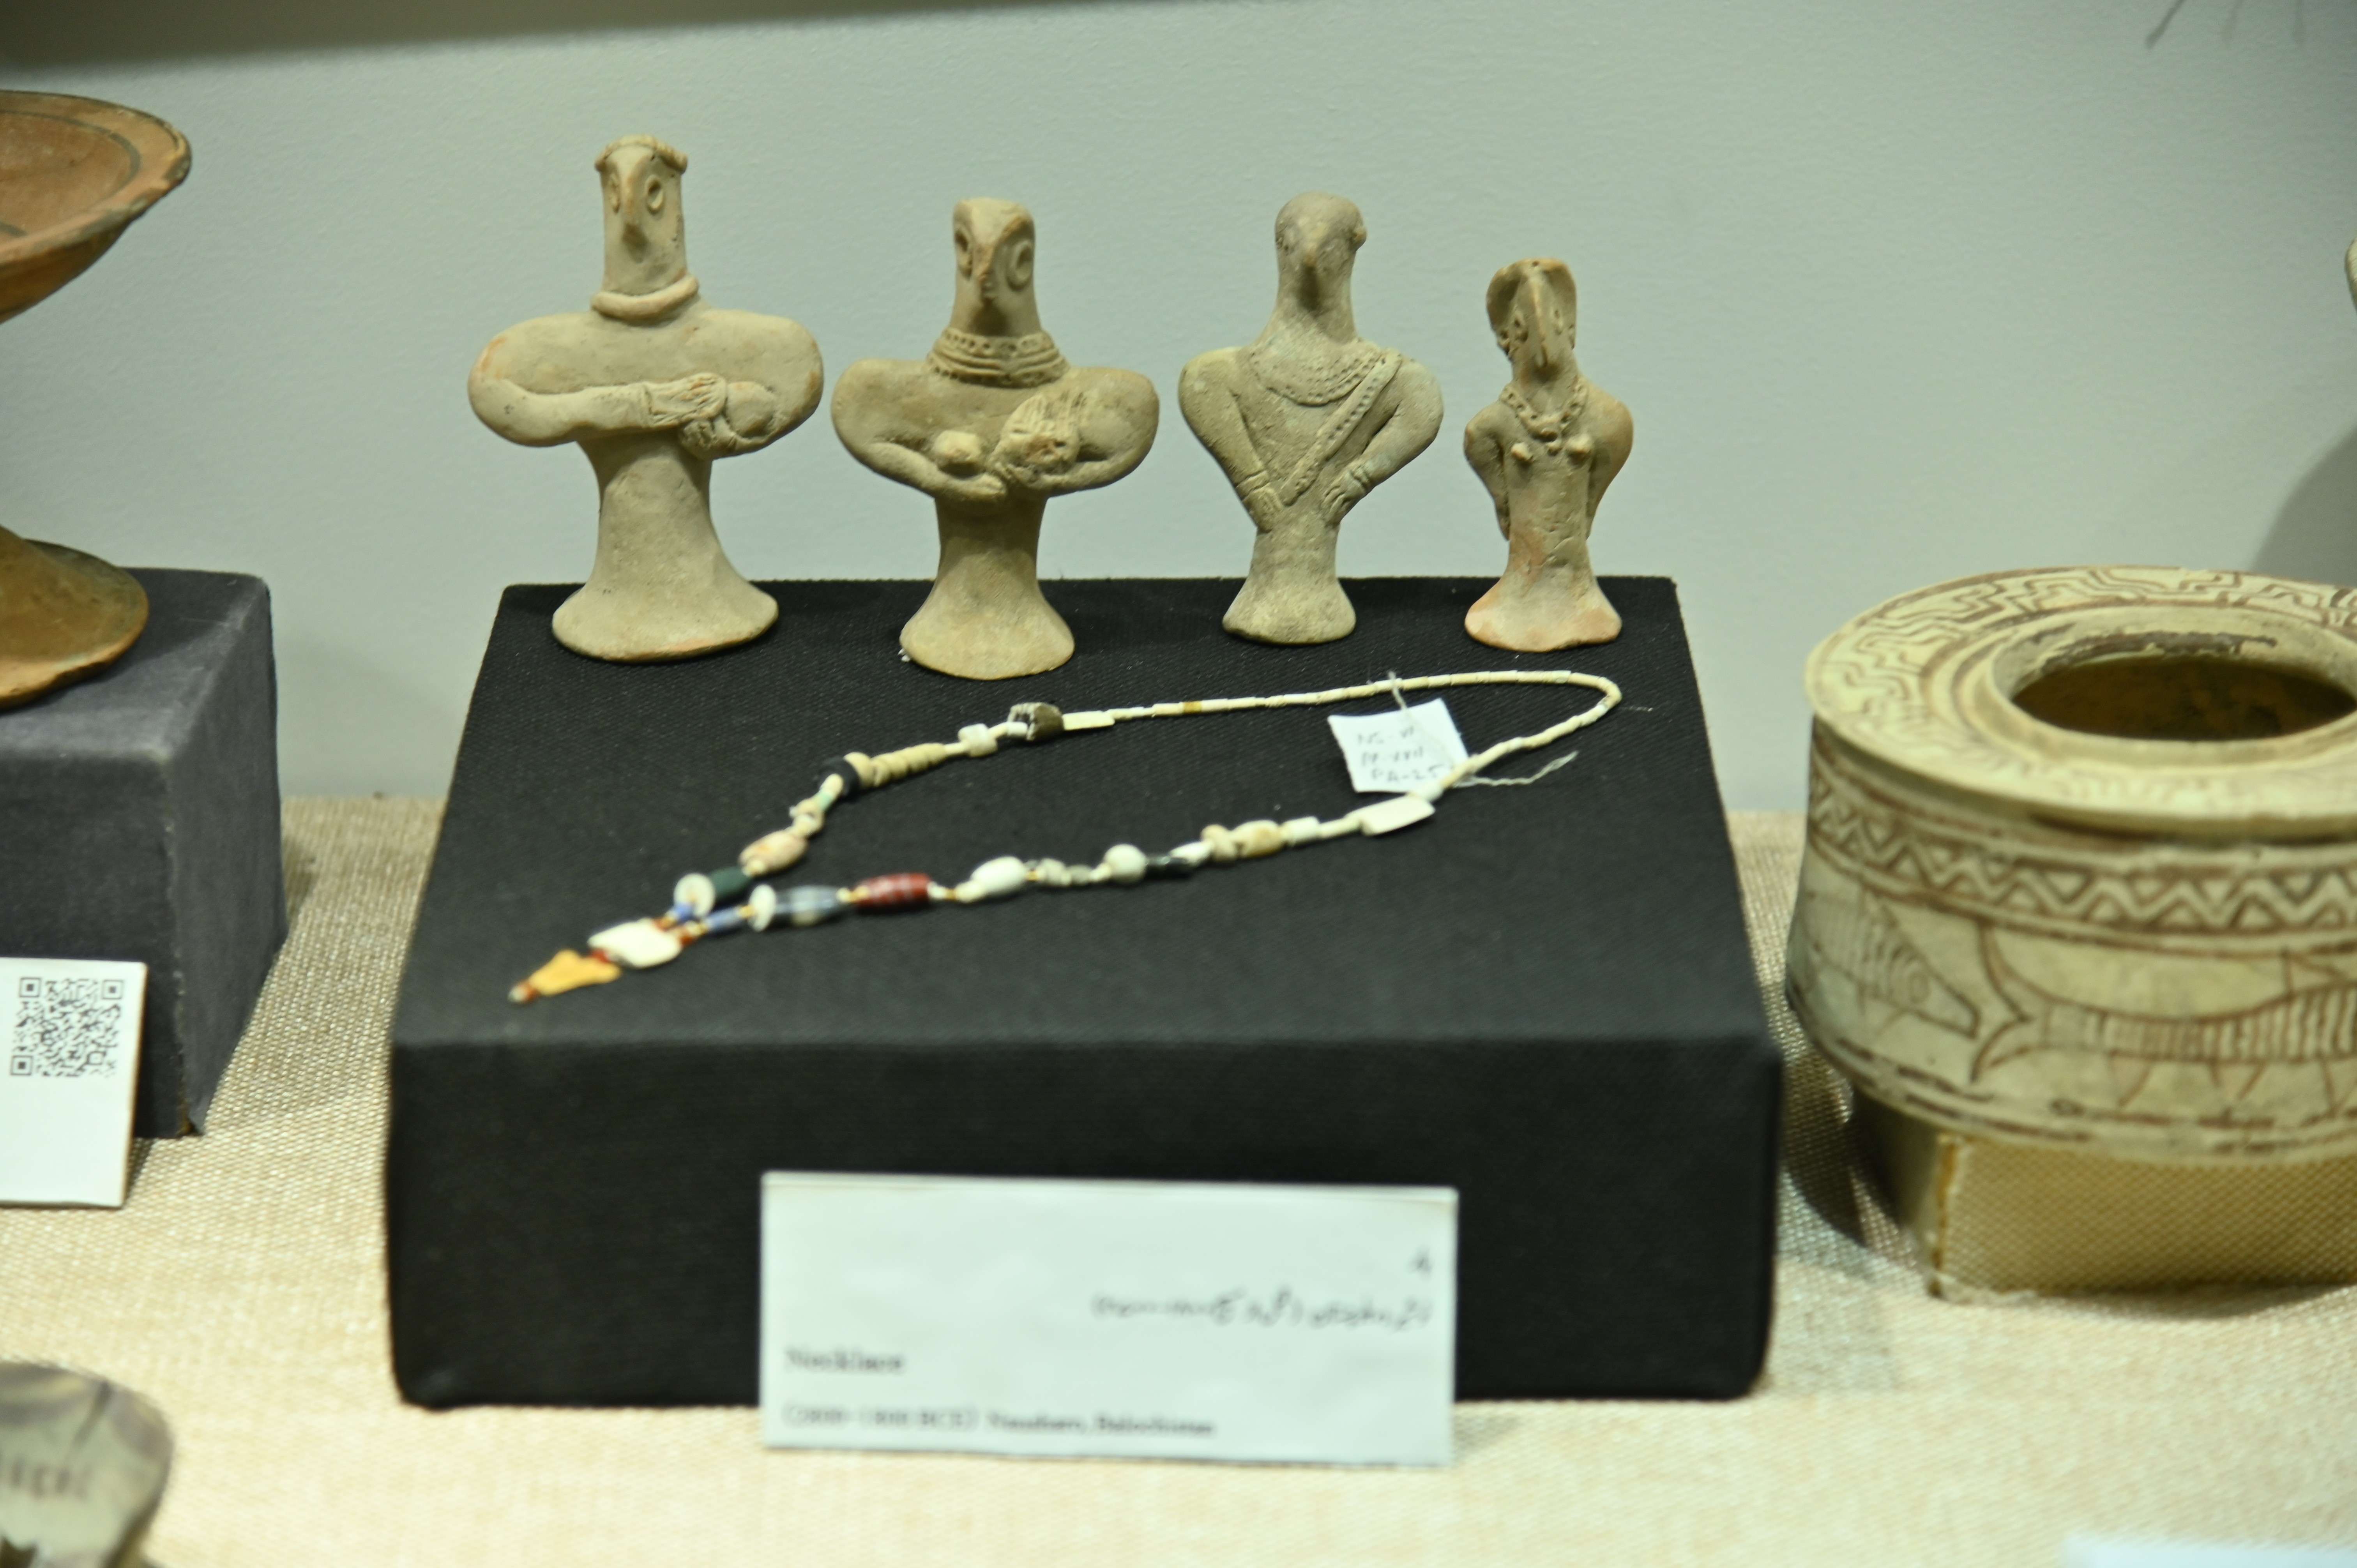 The ancient Jewellery